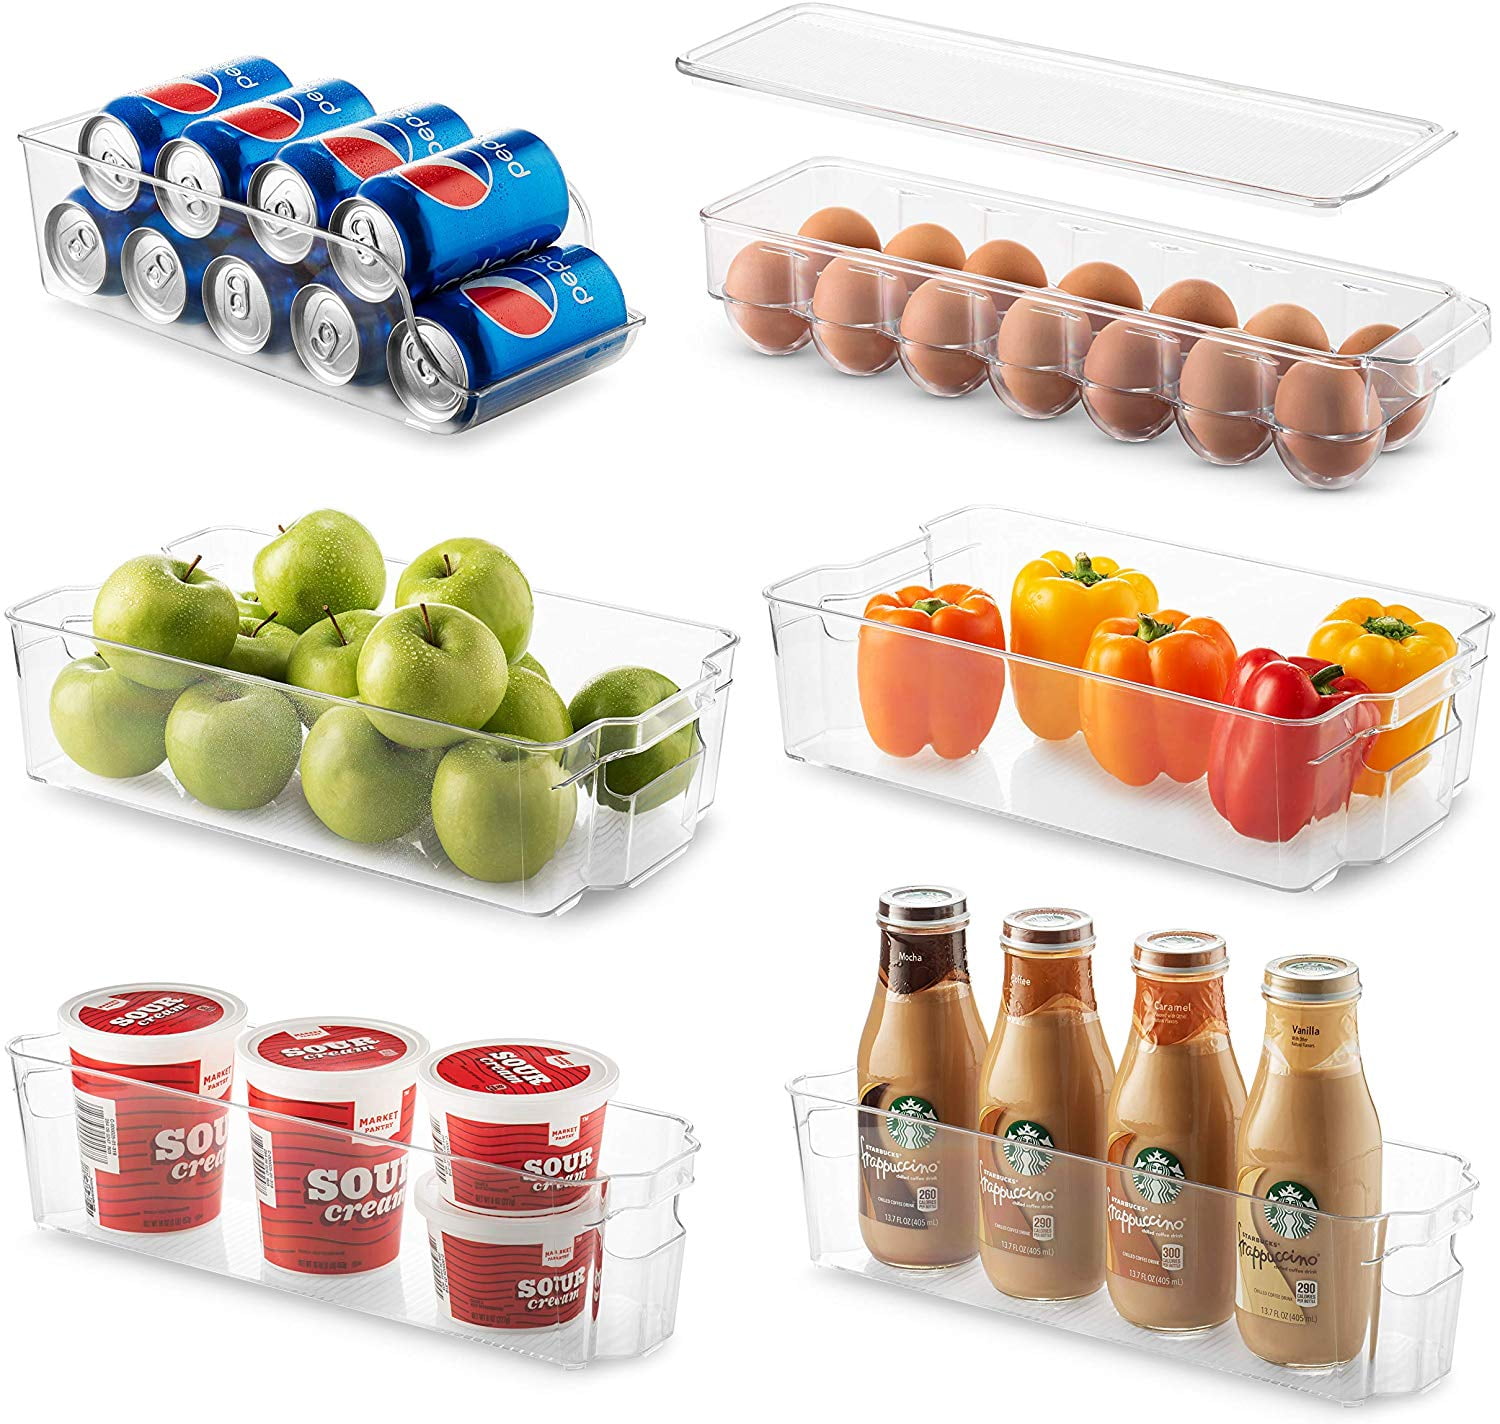 Clear Made of Plastic iDesign Fridge/Freeze Binz Storage Boxes Stackable Kitchen Storage Container for the Fridge and Freezer 